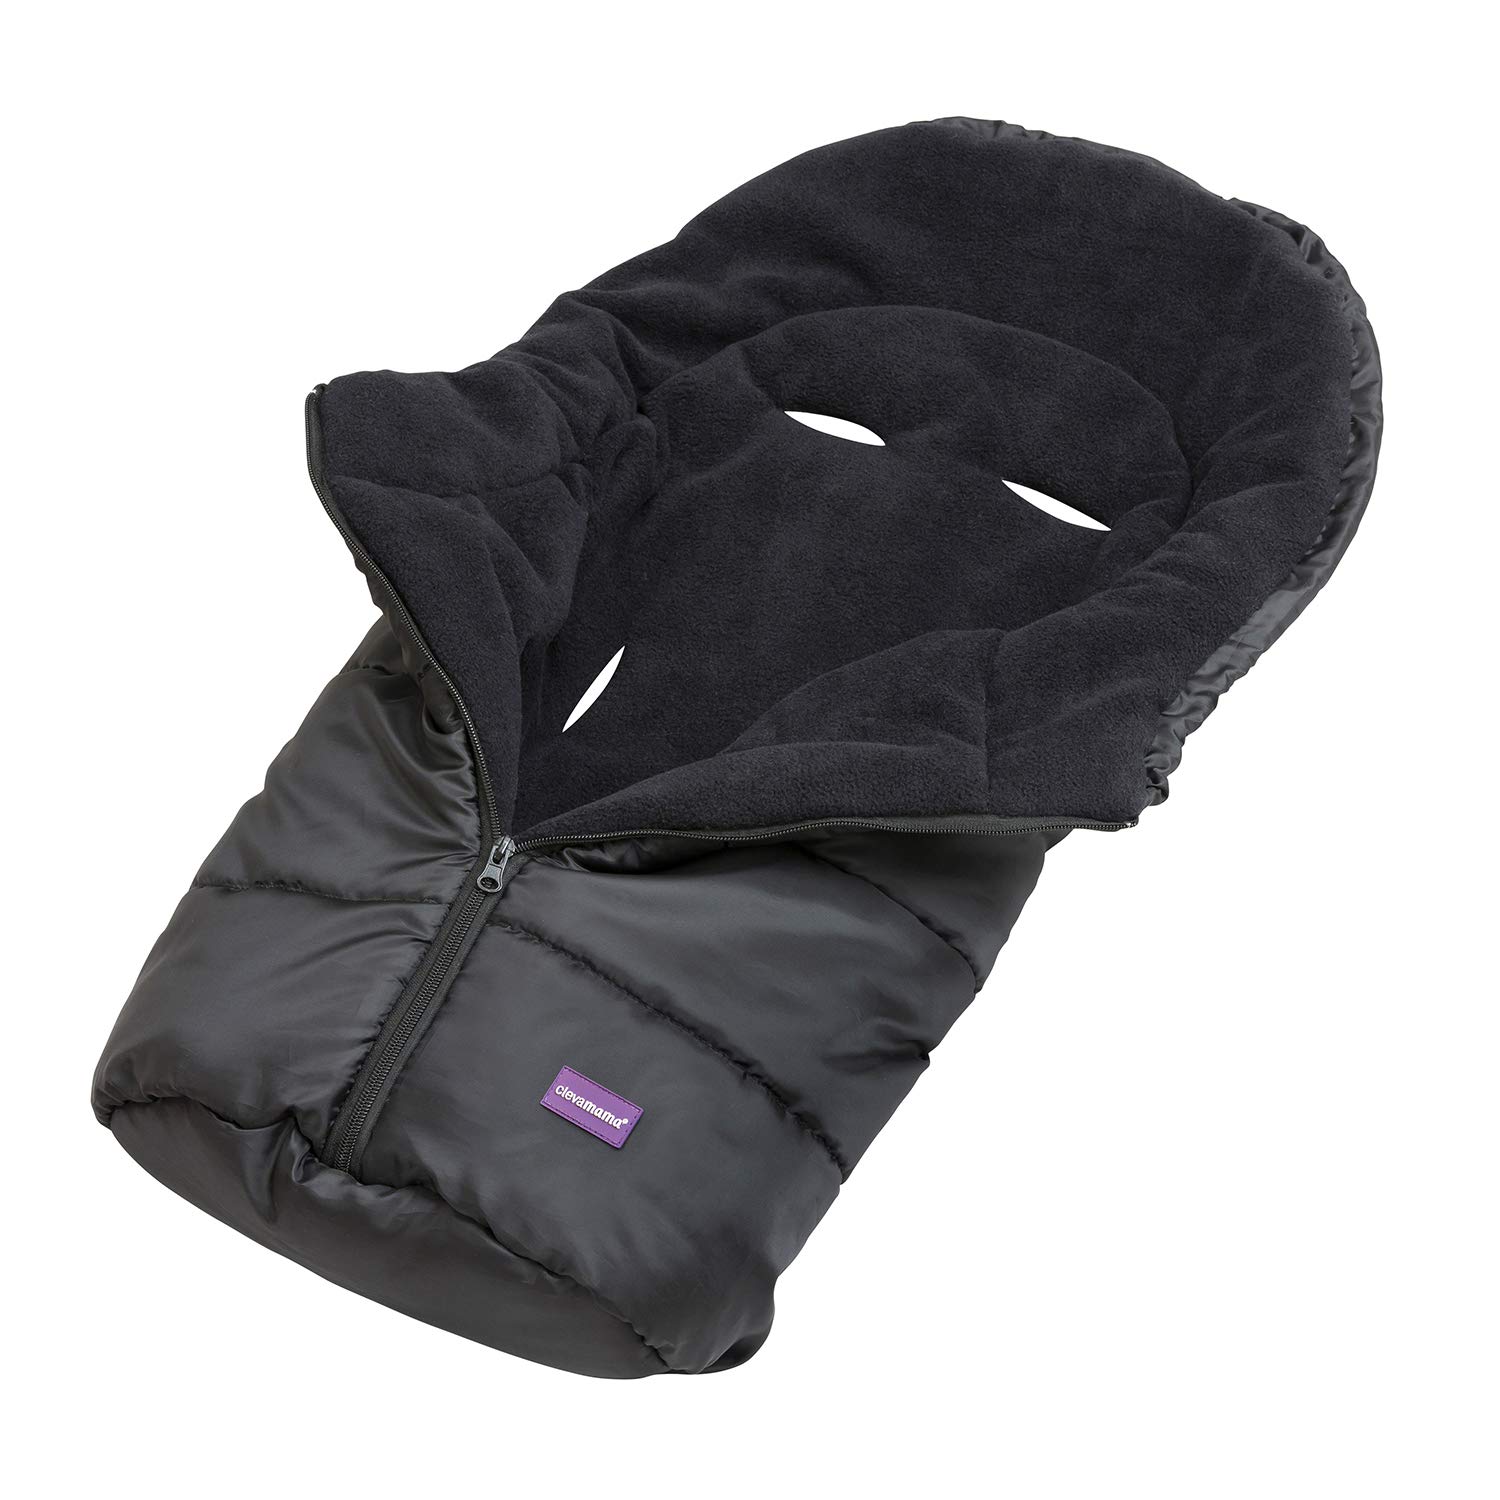 Clevamama Universal Baby Footmuff for Car Seat - Black